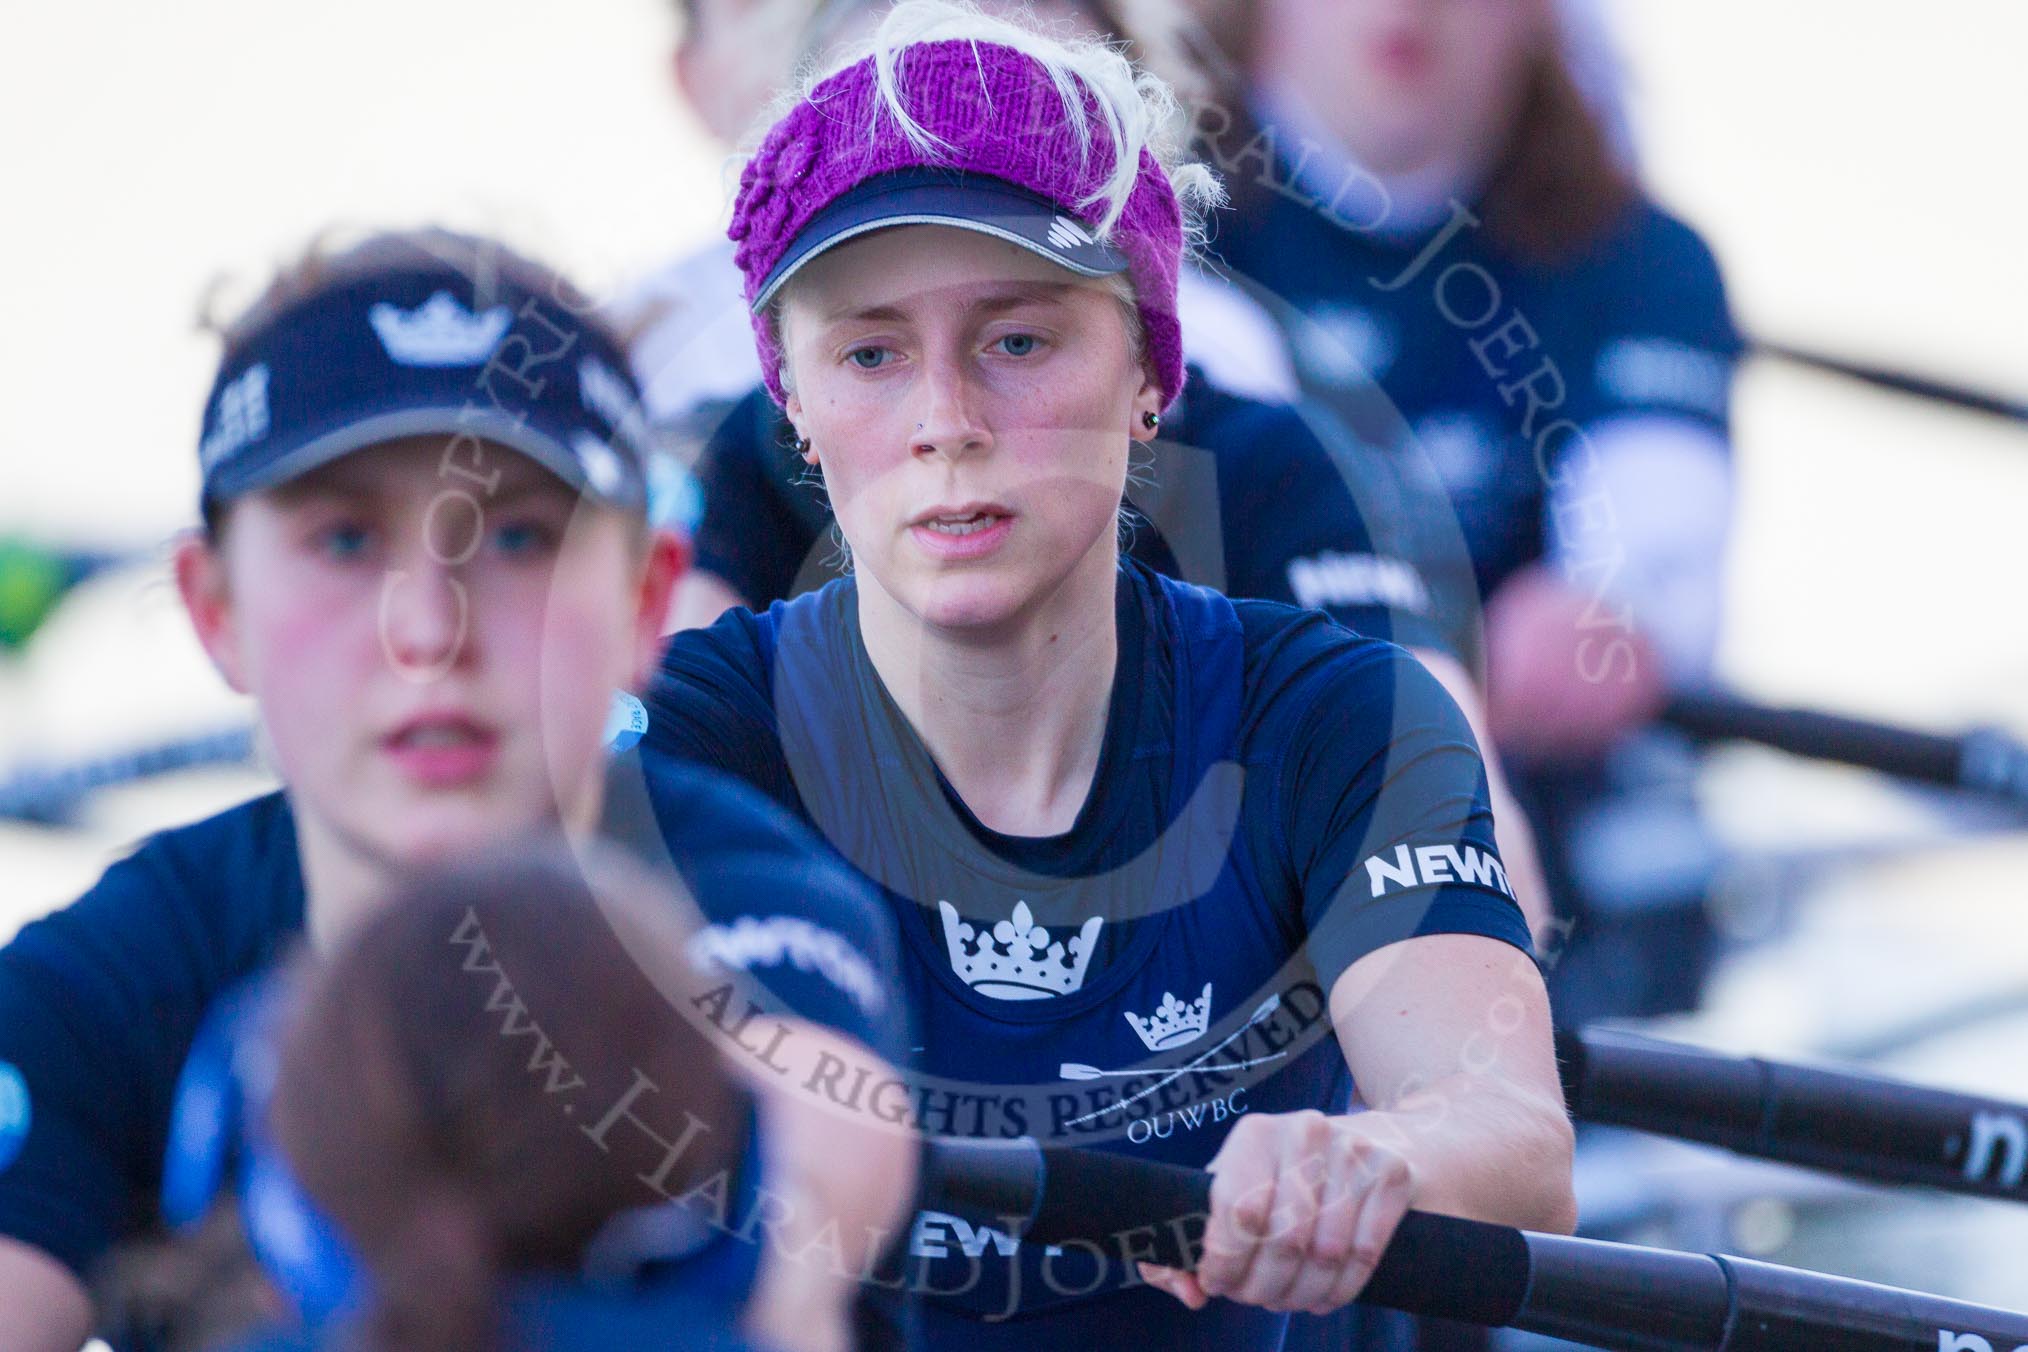 The Boat Race season 2015: OUWBC training Wallingford.

Wallingford,

United Kingdom,
on 04 March 2015 at 17:25, image #332